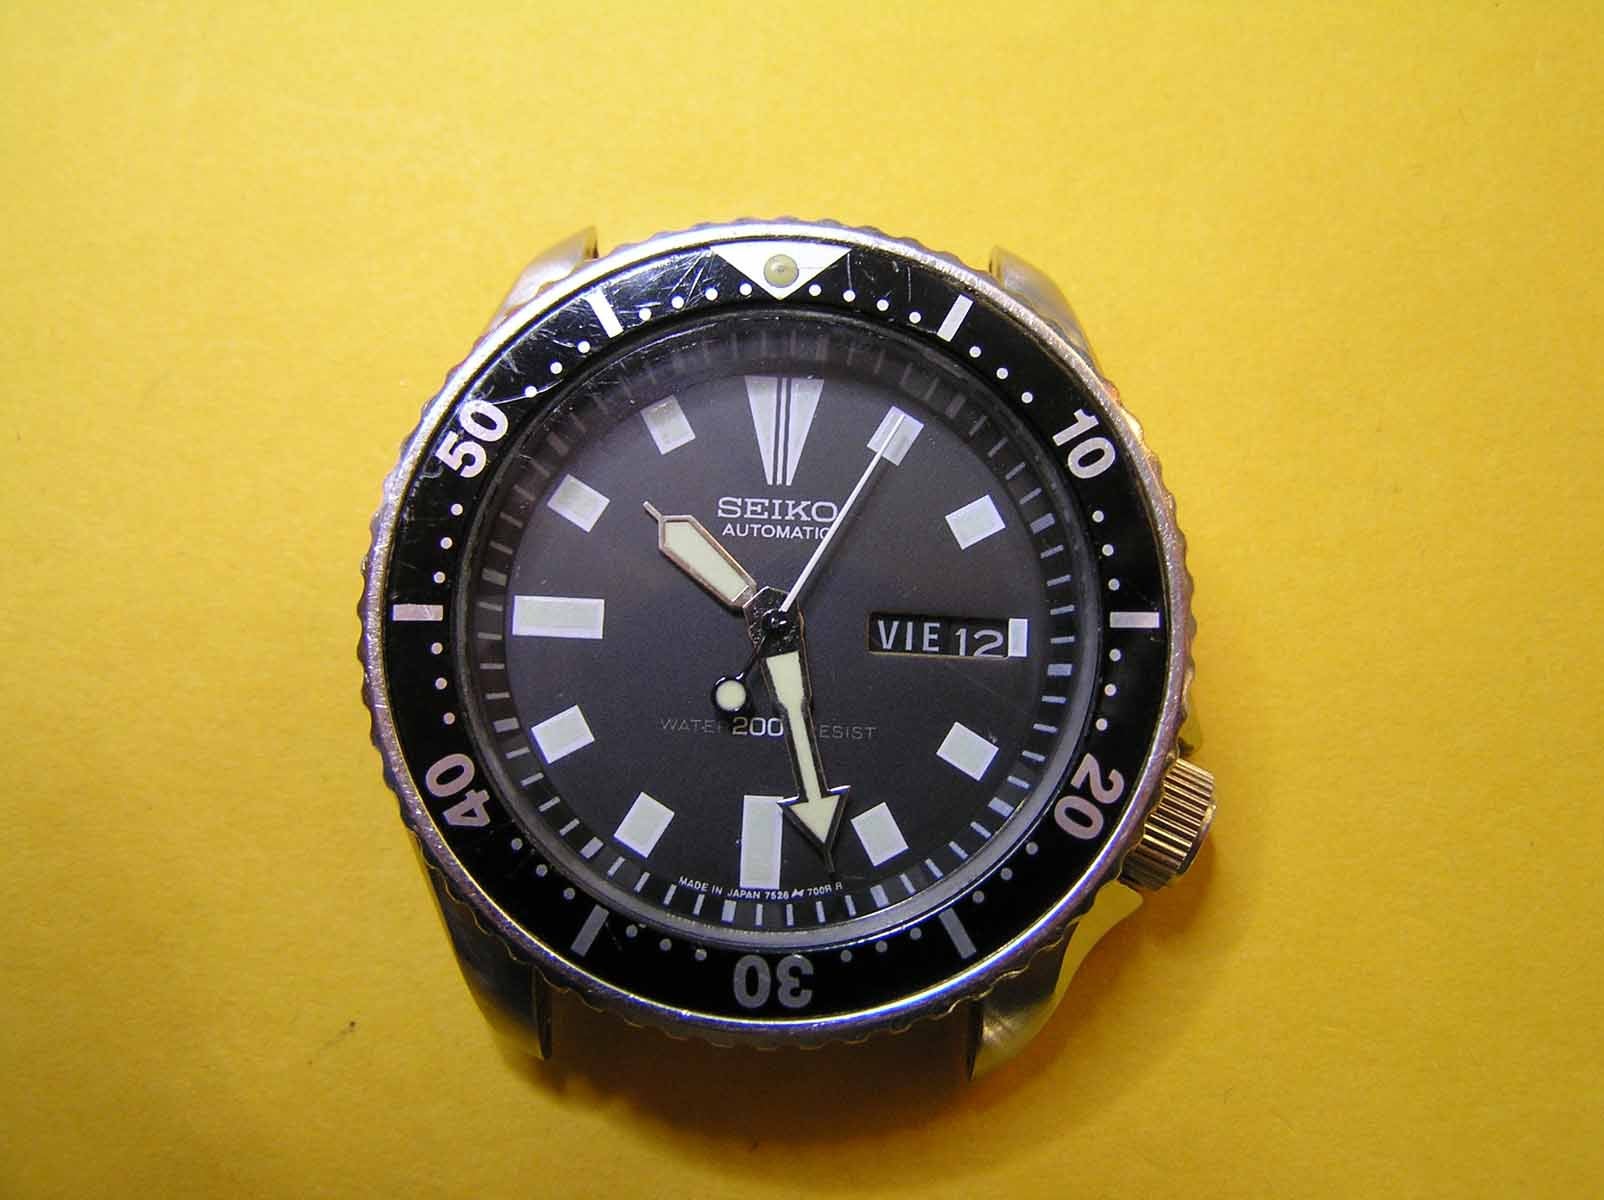 How to spot a fake SKX | The Watch Site